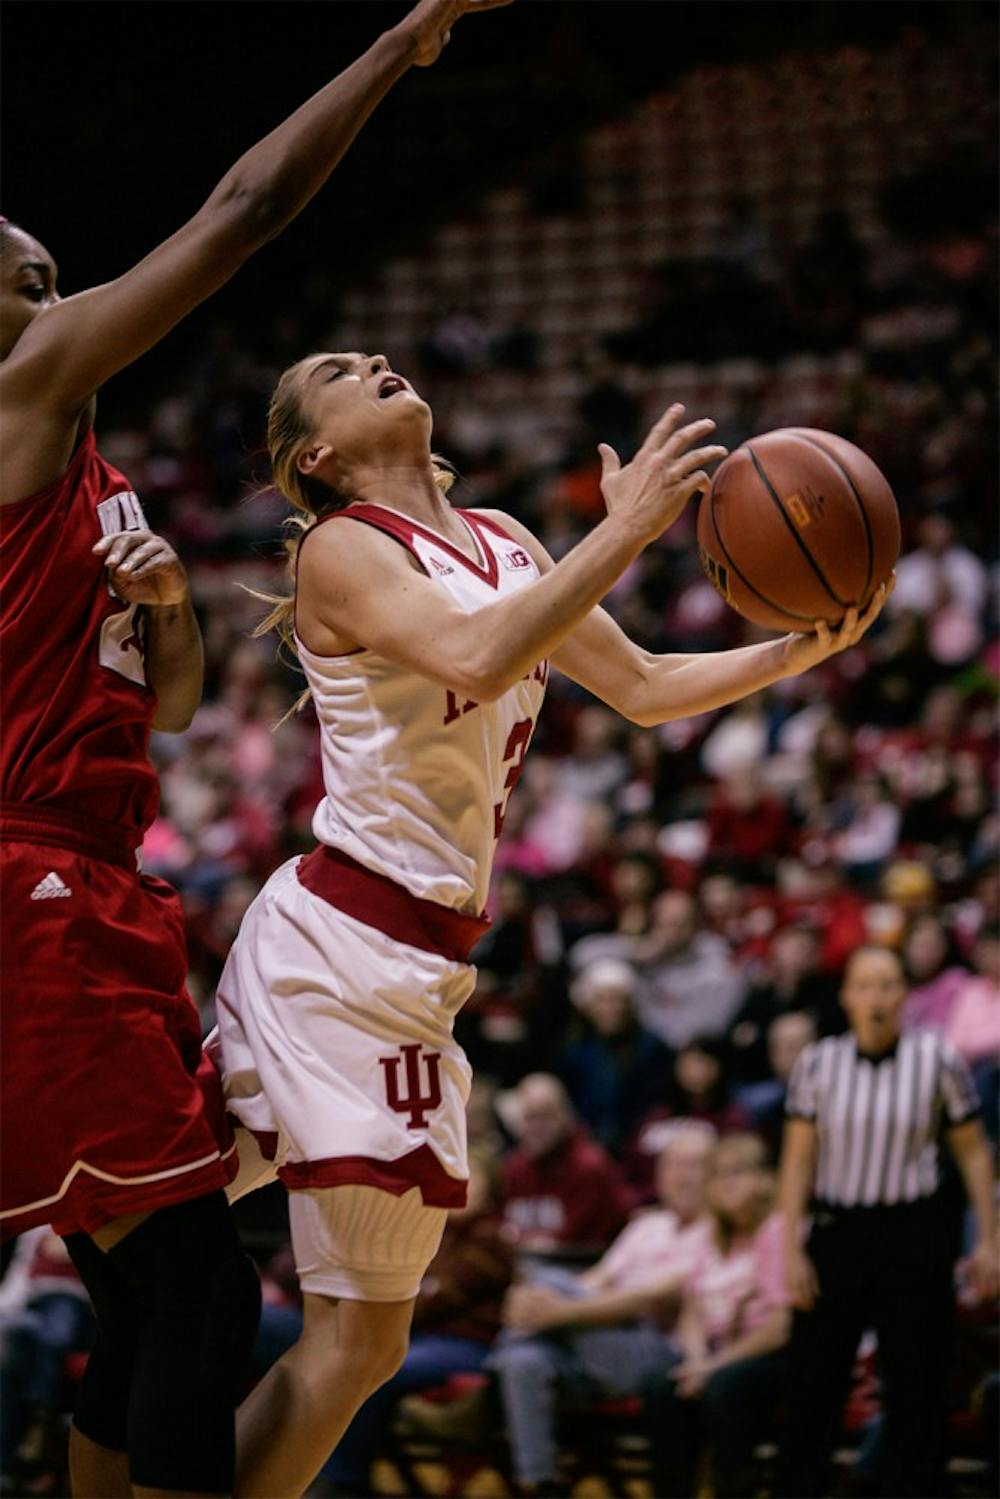 Sophomore guard Tyra Buss leaps for the basket in an attempt to score a layup. Buss led in scoring for the Hoosiers with 24 points and 9 rebounds, helping the Hoosiers beat Wisconsin 67-57 Feb. 14 at Assembly Hall. 